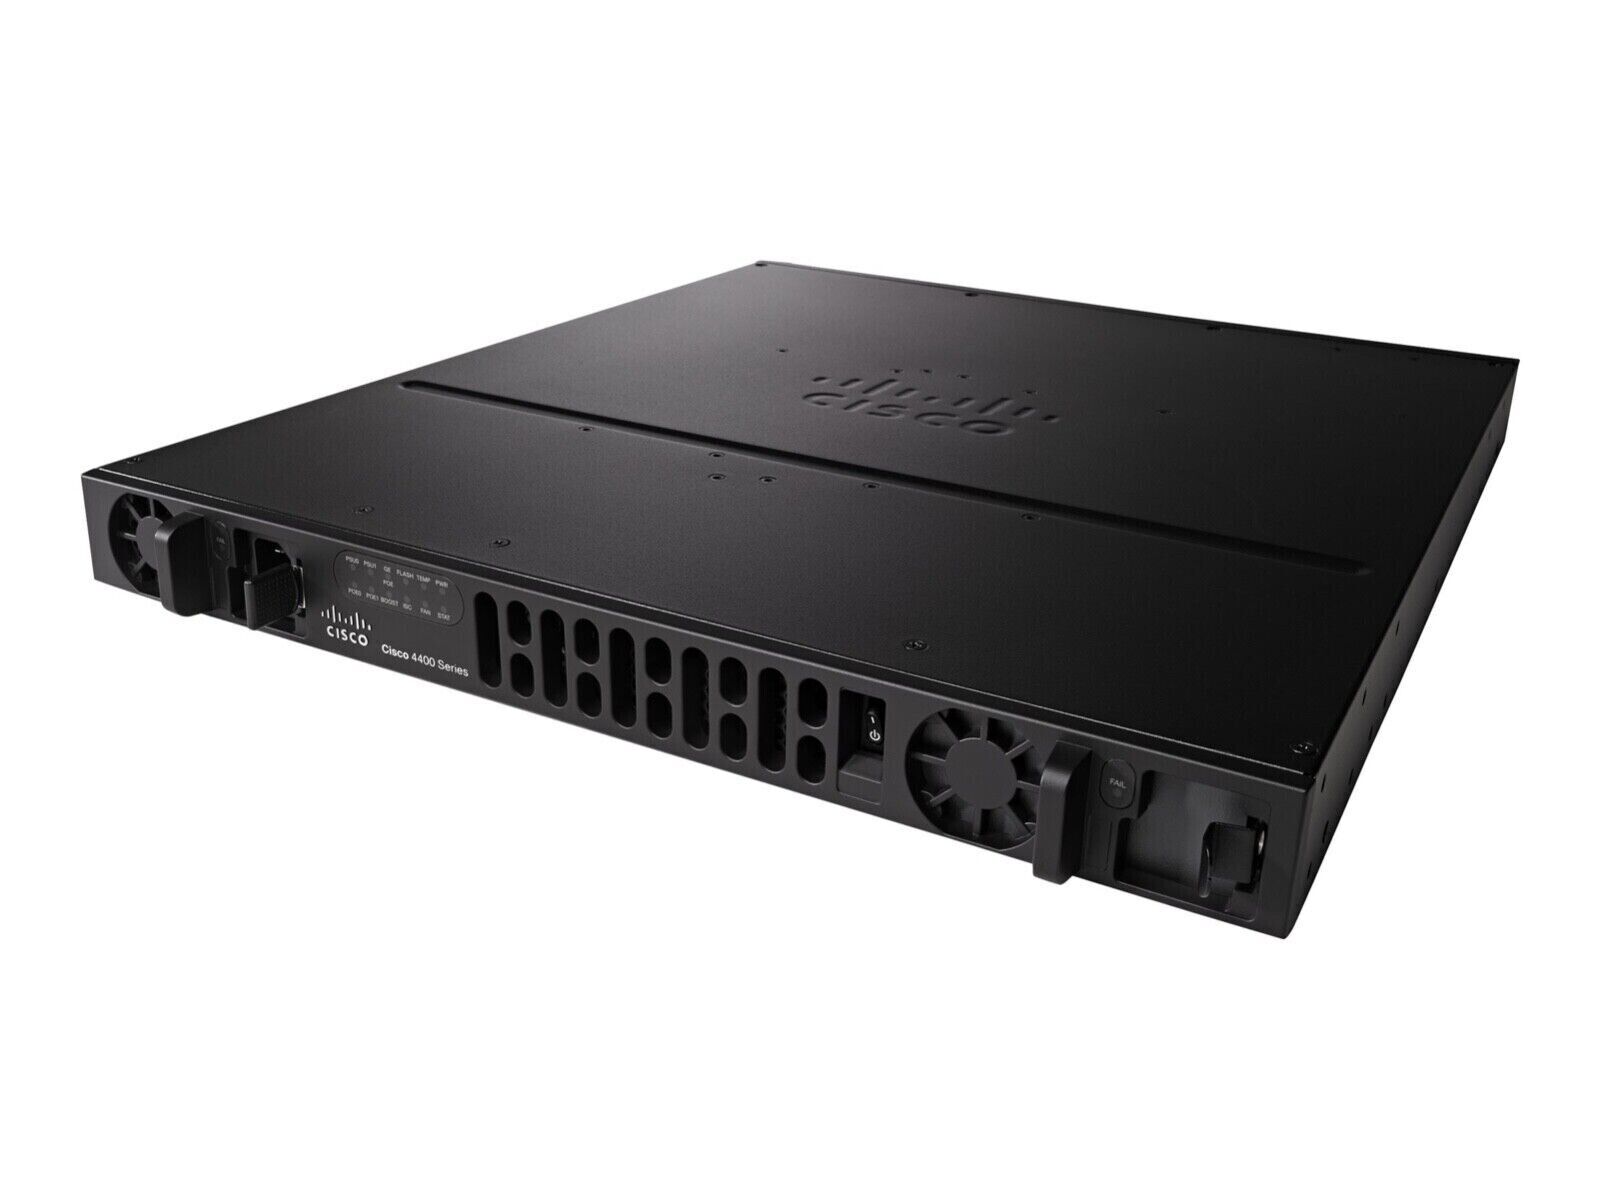 Cisco ISR4431/K9 - ISR4431 - Integrated Service Router